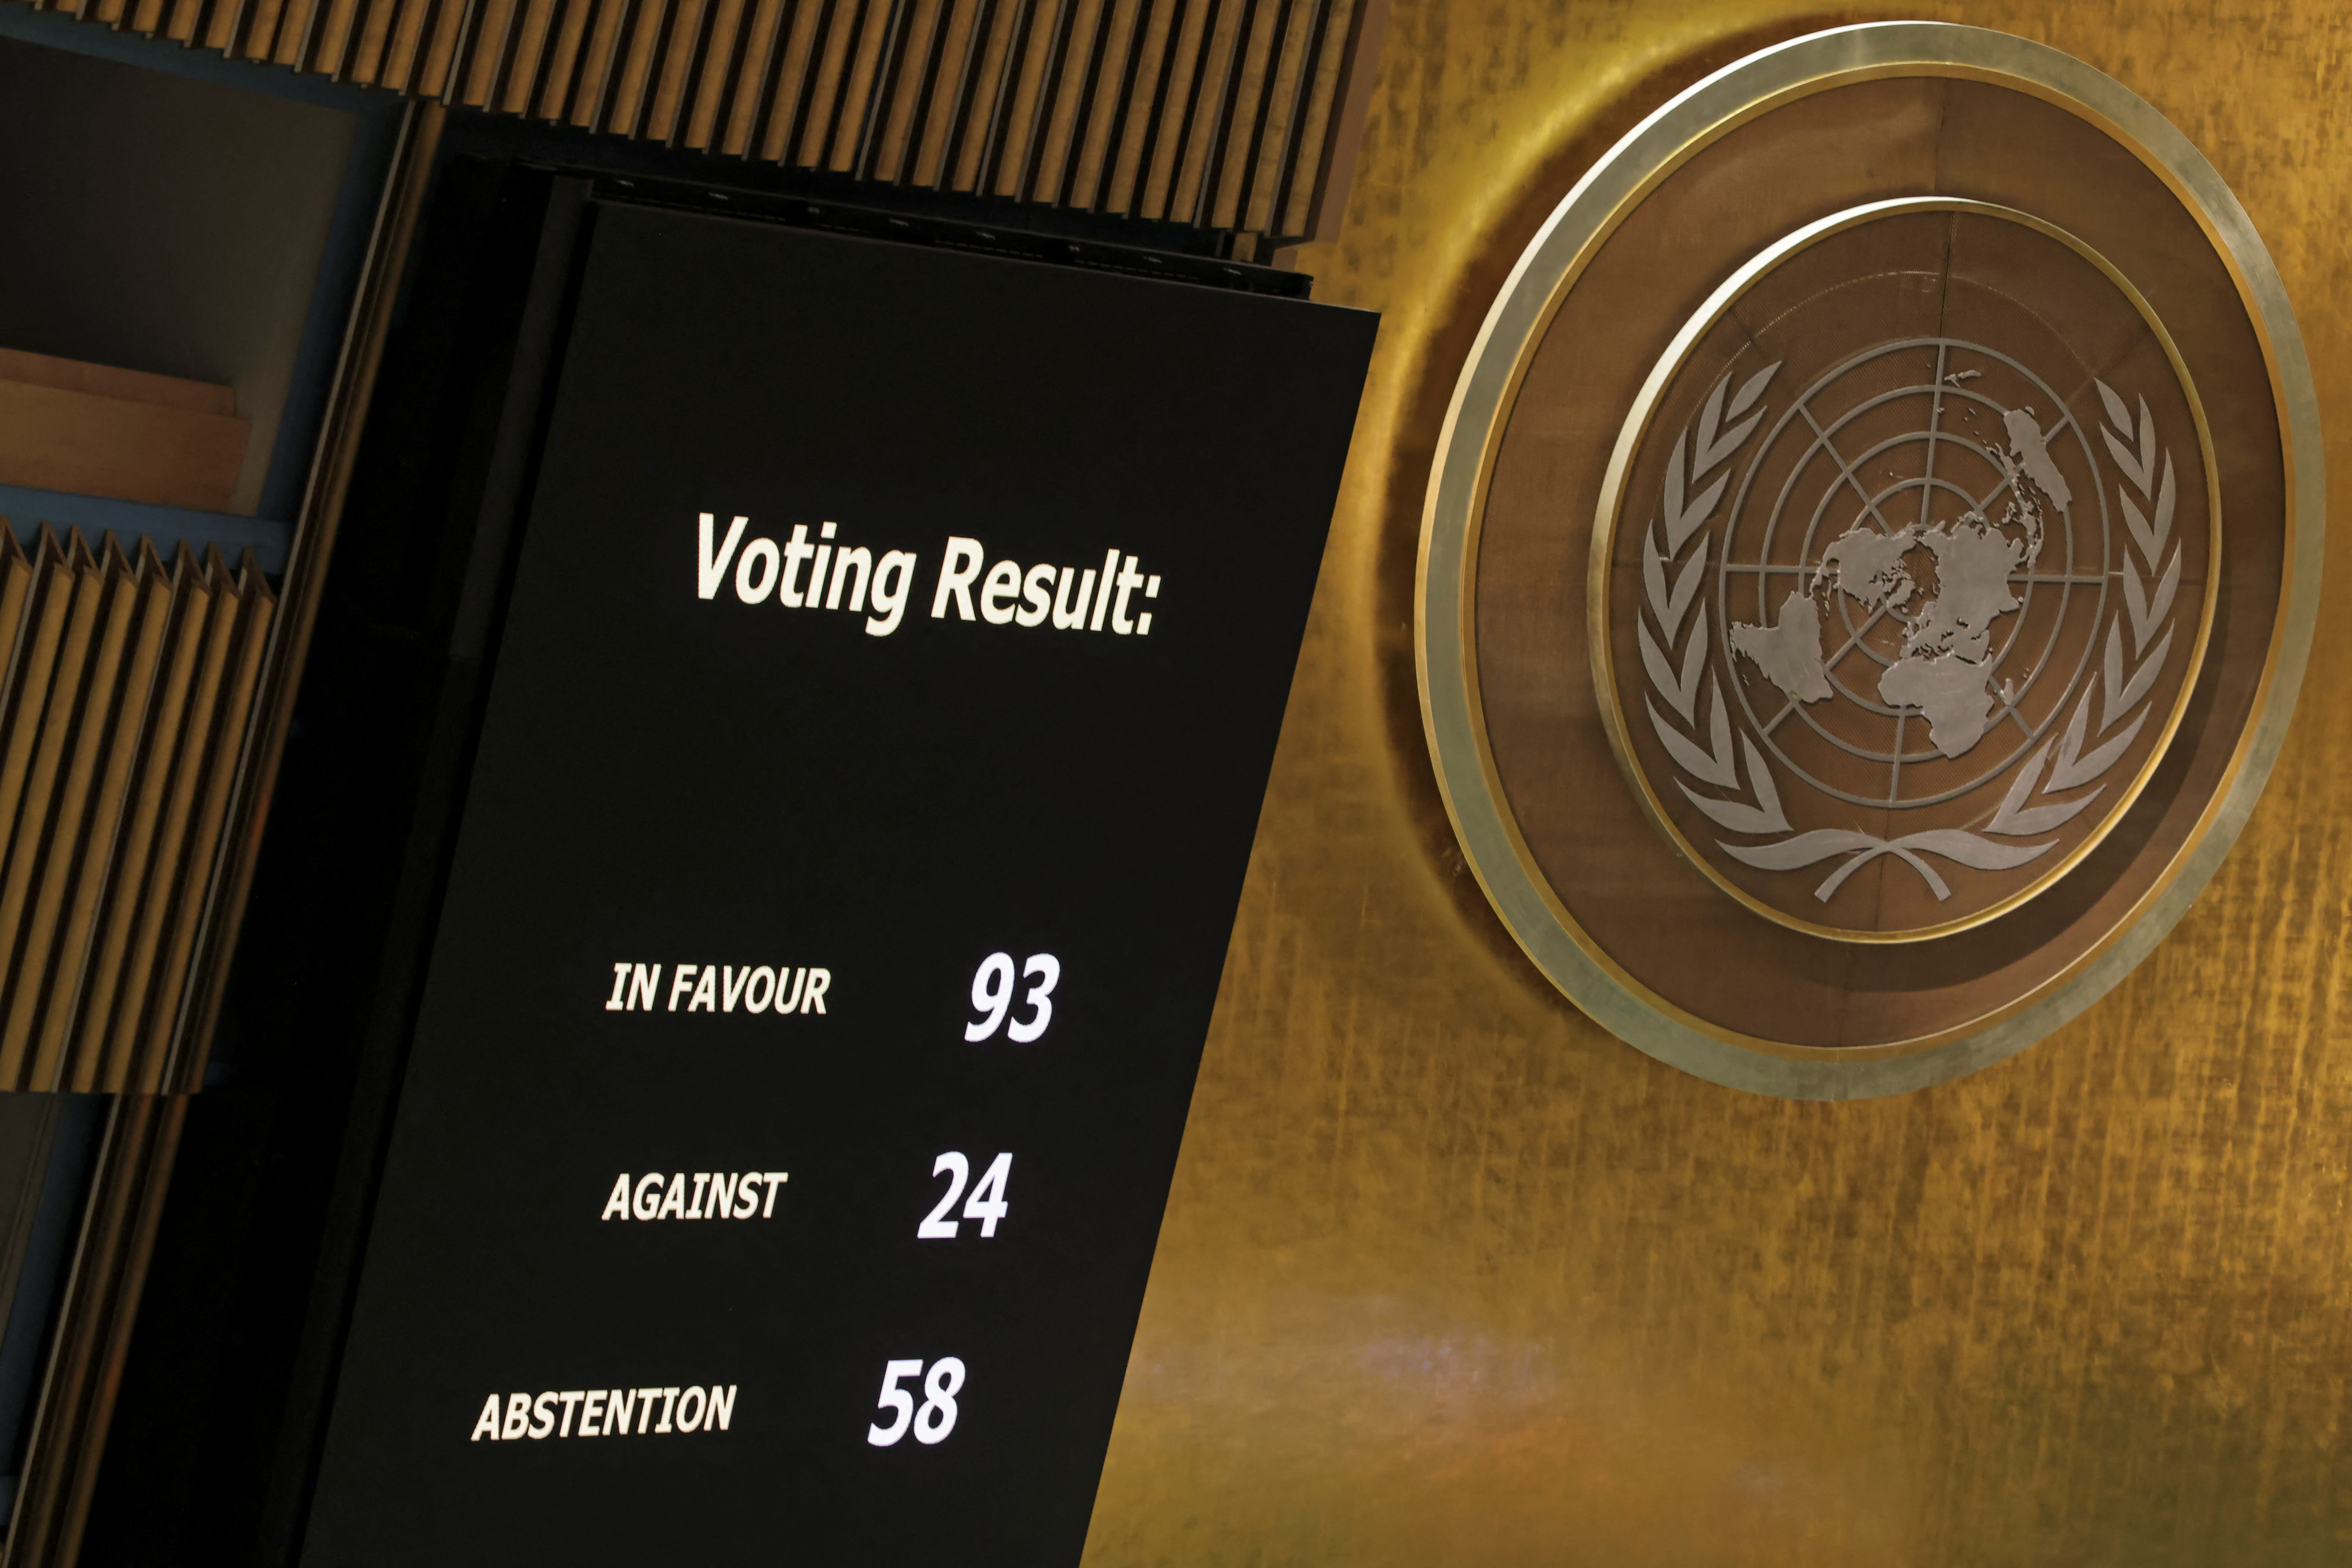 Singapore abstains from vote to suspend Russia from UN human rights body